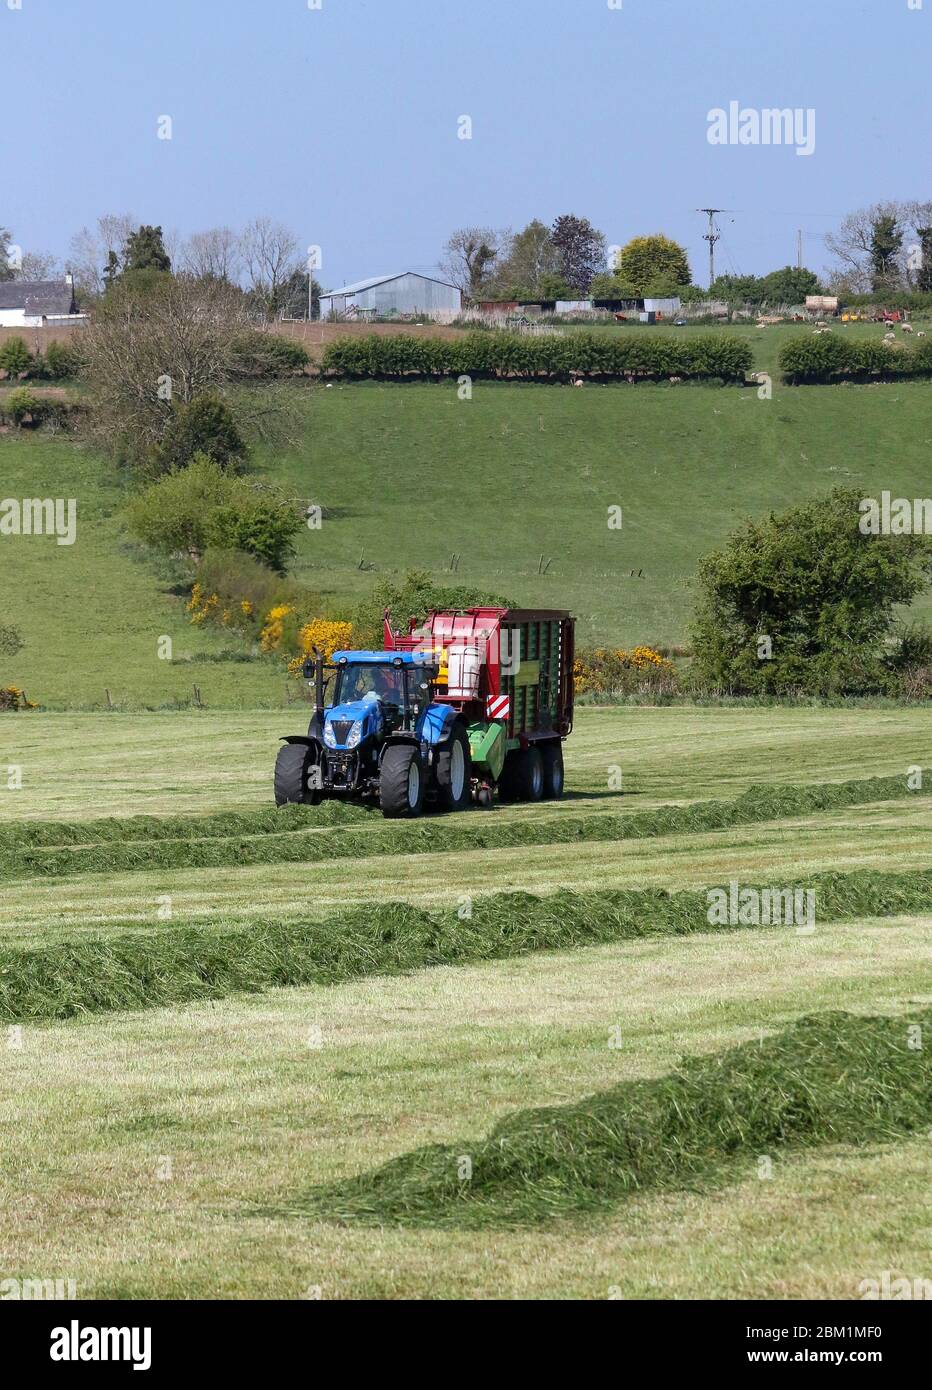 Magheralin, County Armagh, Northern Ireland. 06 May 2020. UK weather - bright blue sky and sunshine today as the execptional spell of dry spring weather continues. There will be some rain overnight before dry and cooler weather returns over the weekend. Gathering grass silage on a warm sunny spring day. Credit: CAZIMB/Alamy Live News. Stock Photo